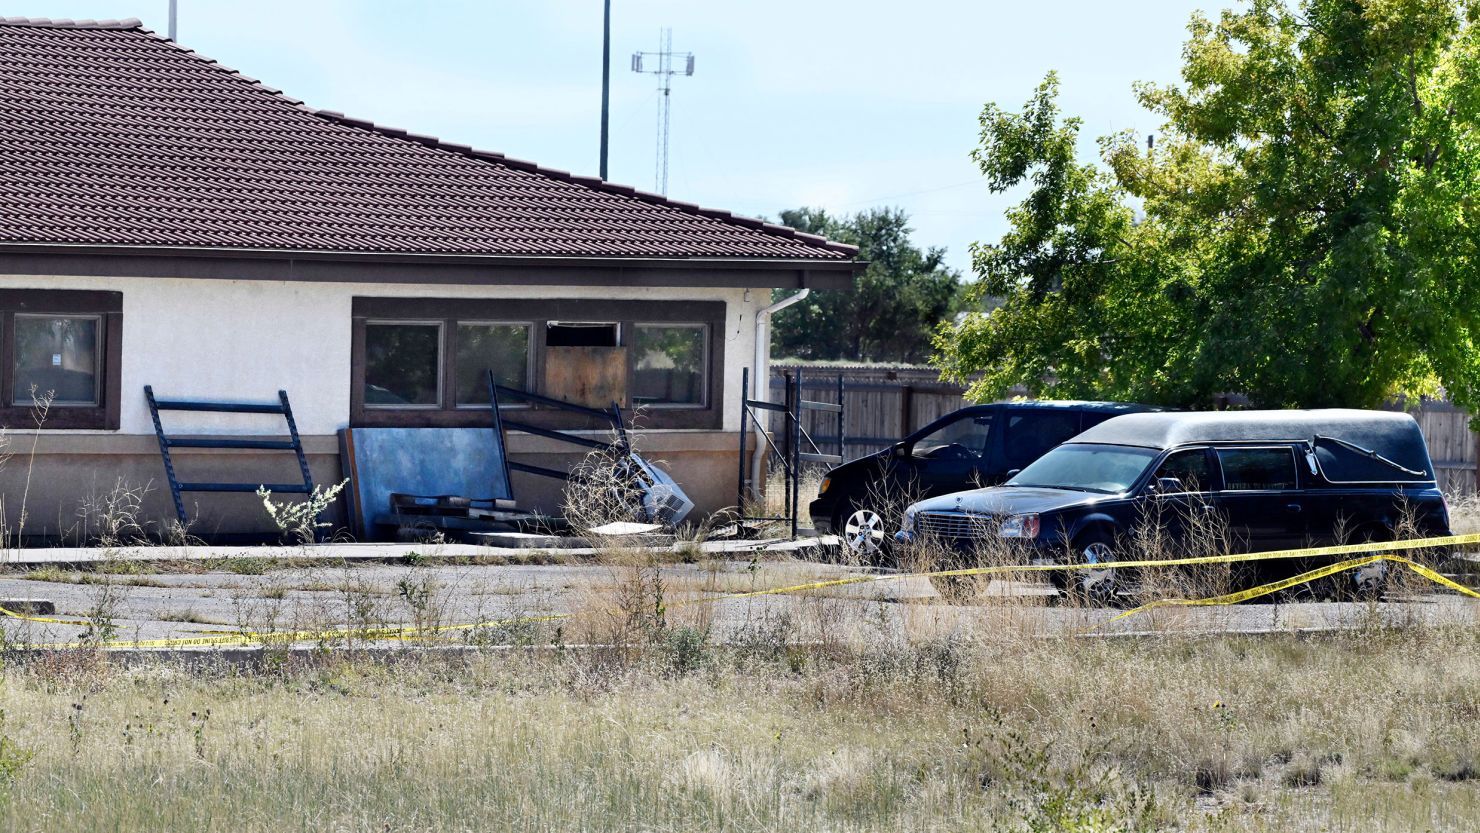 A hearse and debris can be seen at the rear of the Return to Nature Funeral Home in Penrose, Colorado.